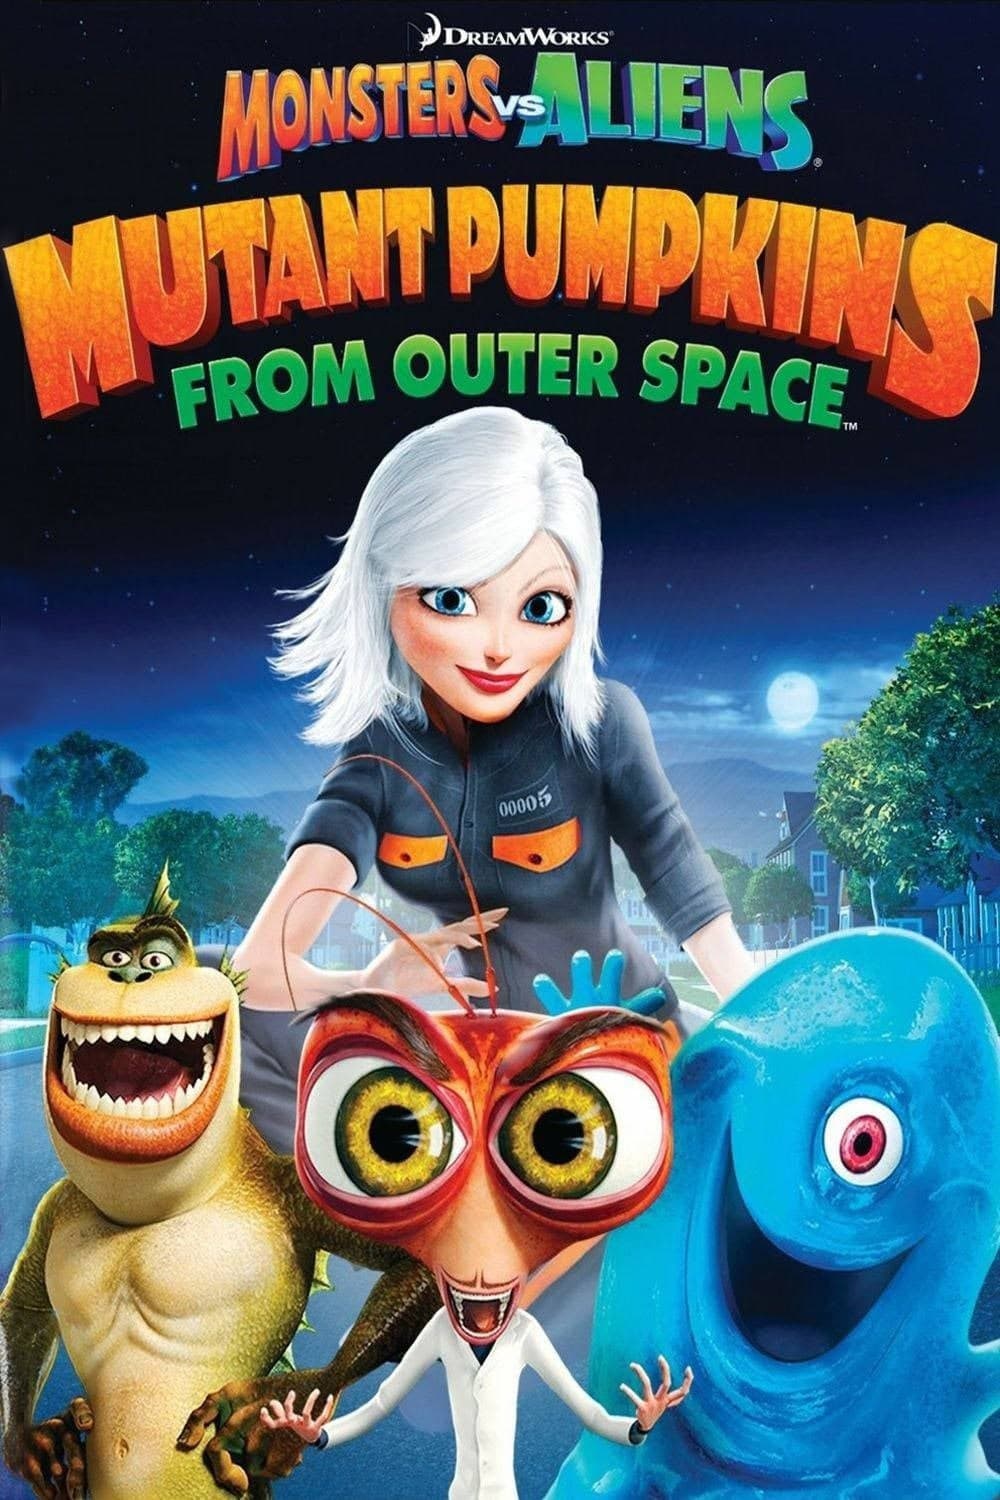 MONSTERS VS ALIENS: MUTANT PUMPKINS FROM OUTER SPACE